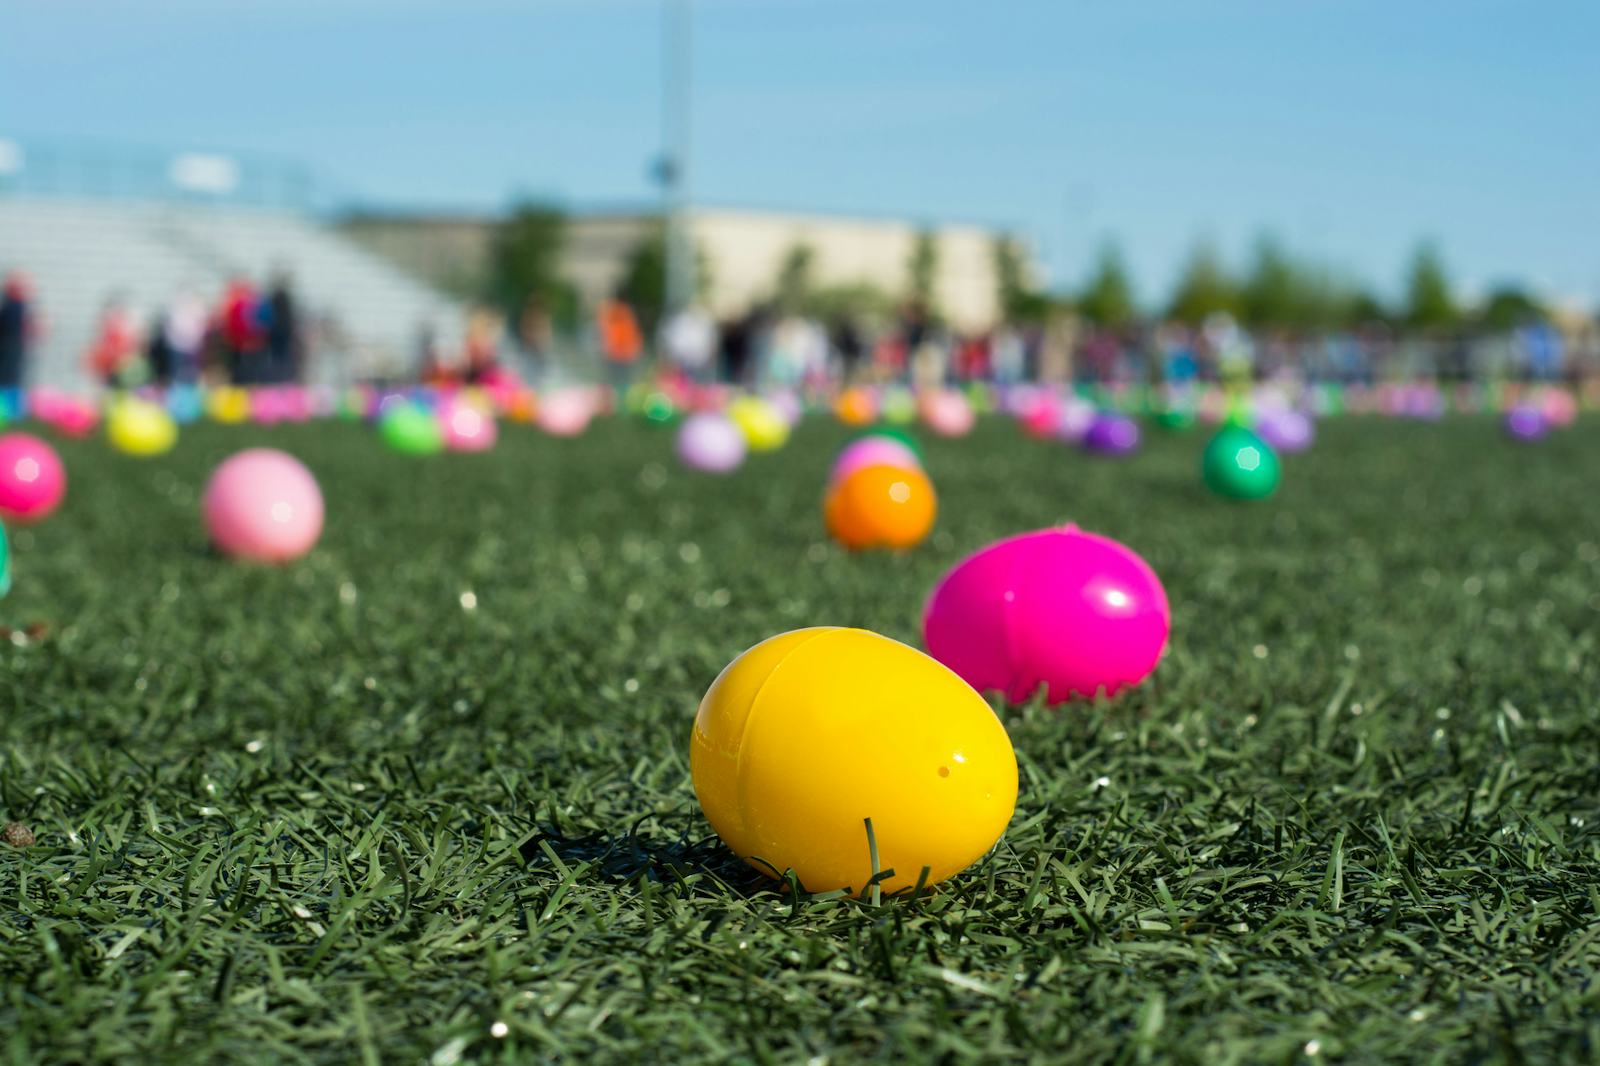 Why Do We Have Easter Egg Hunts? The Tradition Has Been Around Longer